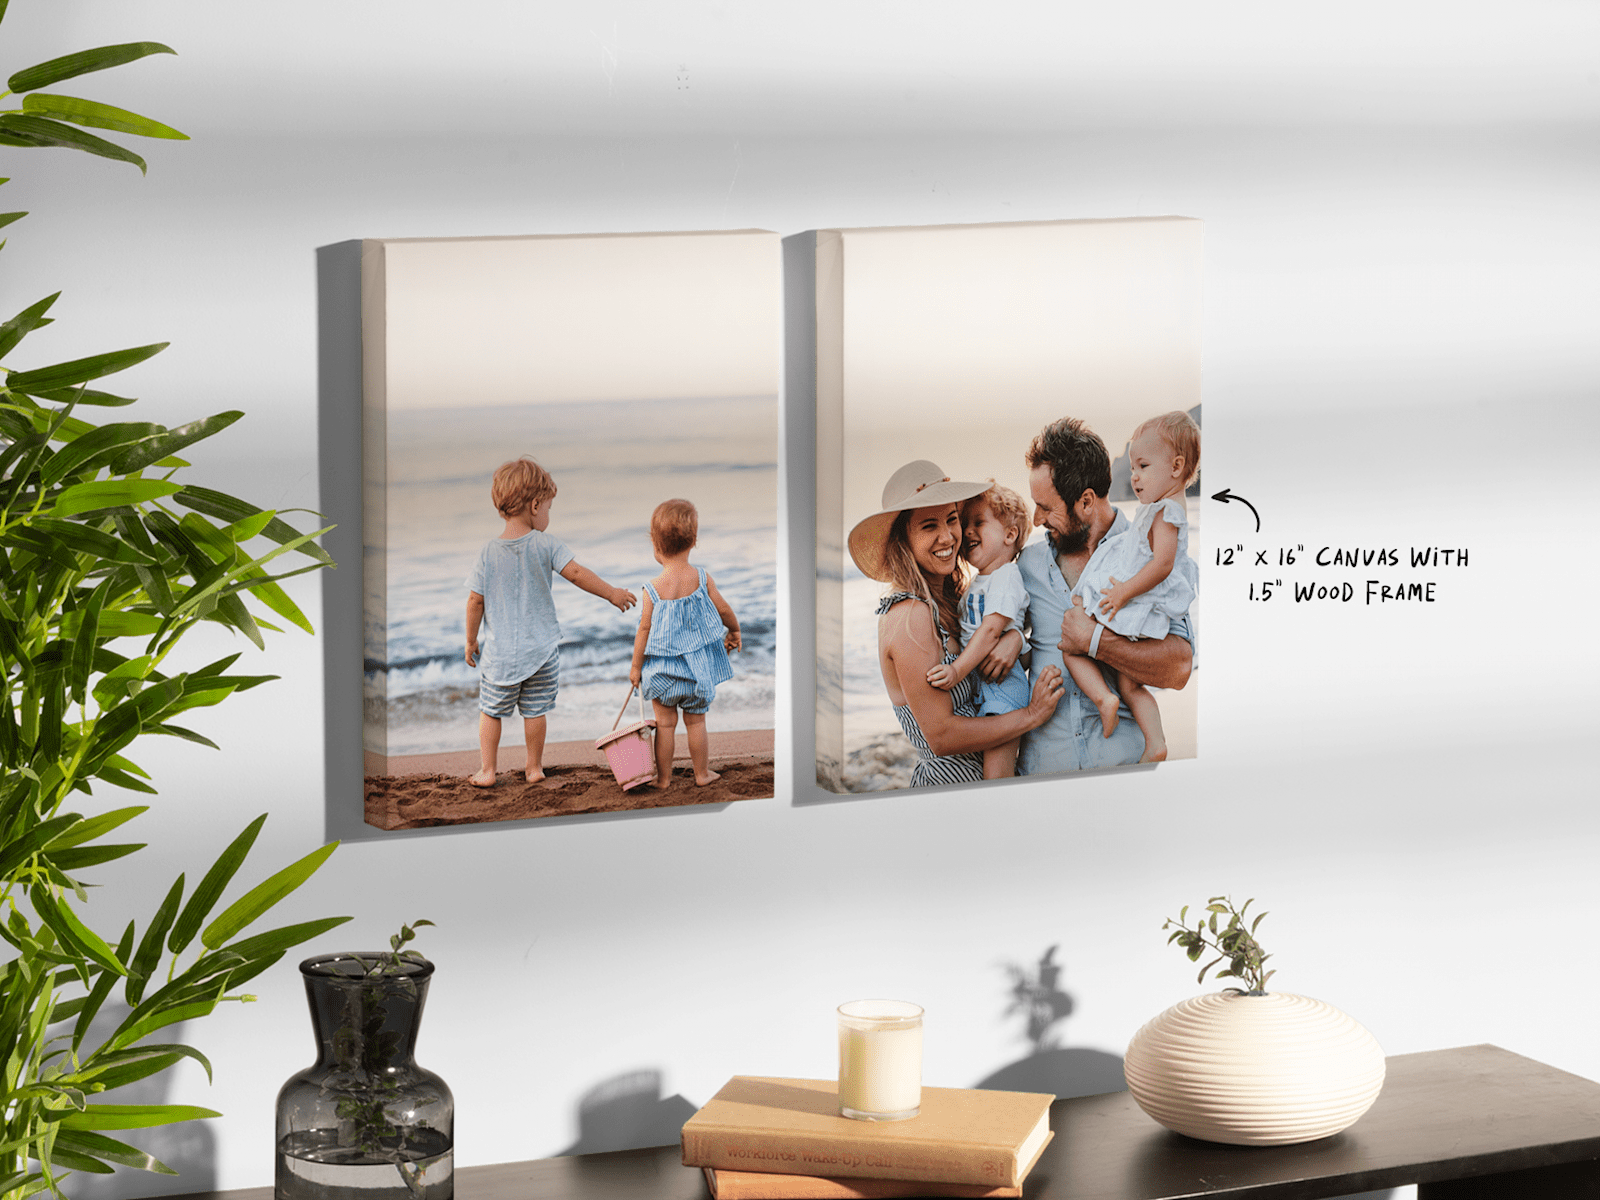 Canvas prints: customized photo prints in Canada